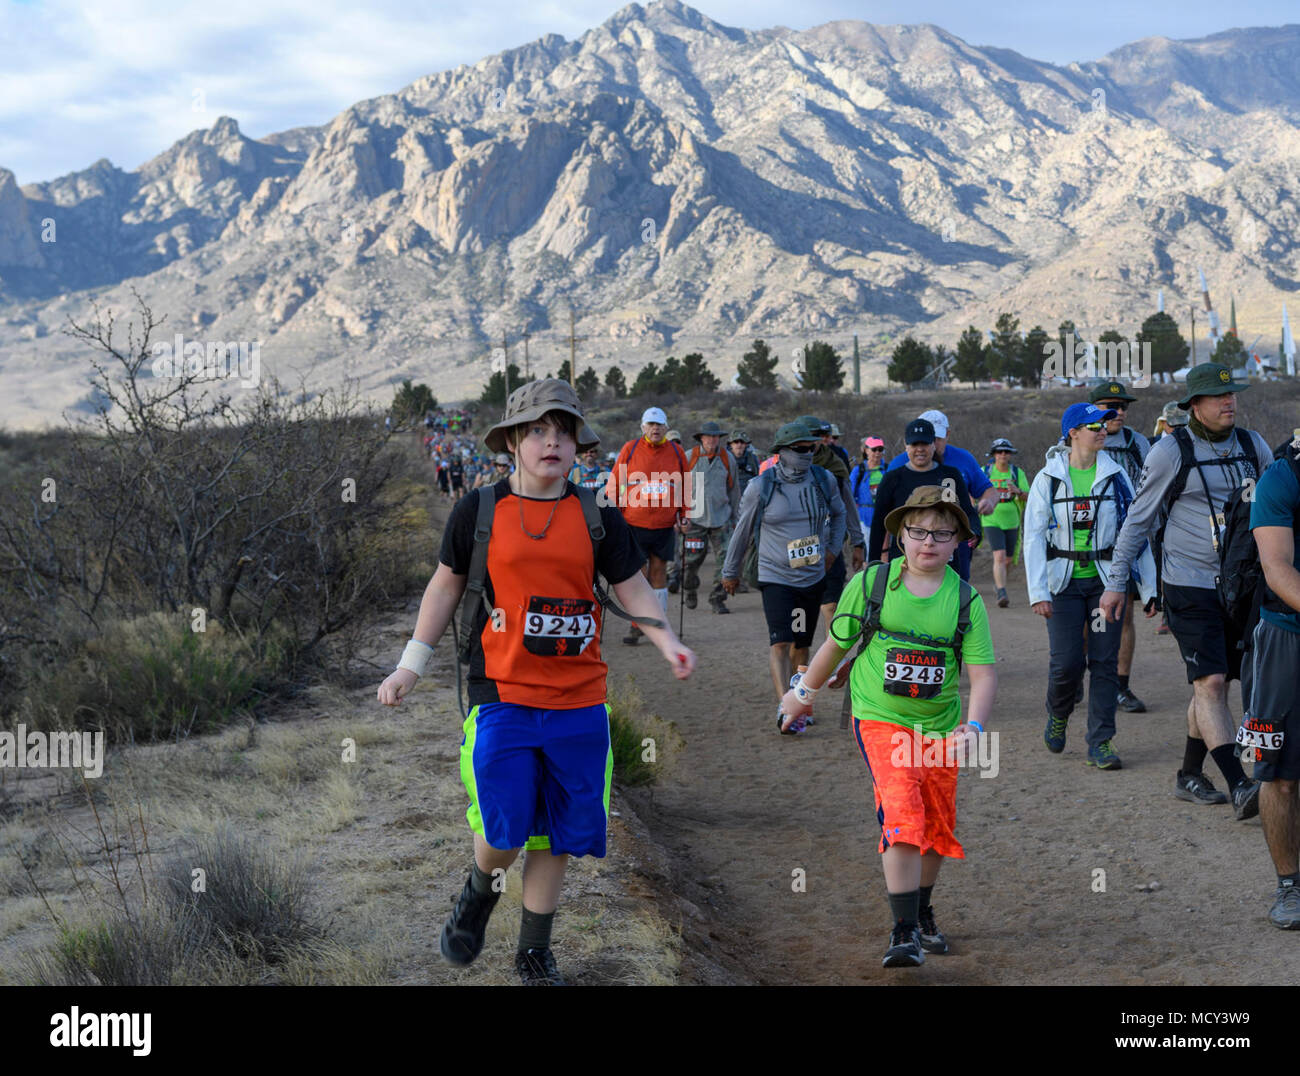 Servicemembers, families and civilians participate in the 29th Annual Bataan Memorial Death March on March 25, 2018 at White Sands Missile Range, New Mexico.  The Bataan Memorial Death March is a 26.2-mile run/ruck/walk event held annually to honor thousands of American and Filipino soldiers who defended the Philippines at the outbreak of World War II, particularly the 75,000 who surrendered to invading Japanese forces on April 9, 1942, and were marched by their captors over 60 miles through treacherous jungle terrain and into captivity and is considered to be one of the toughest marathon-leng Stock Photo